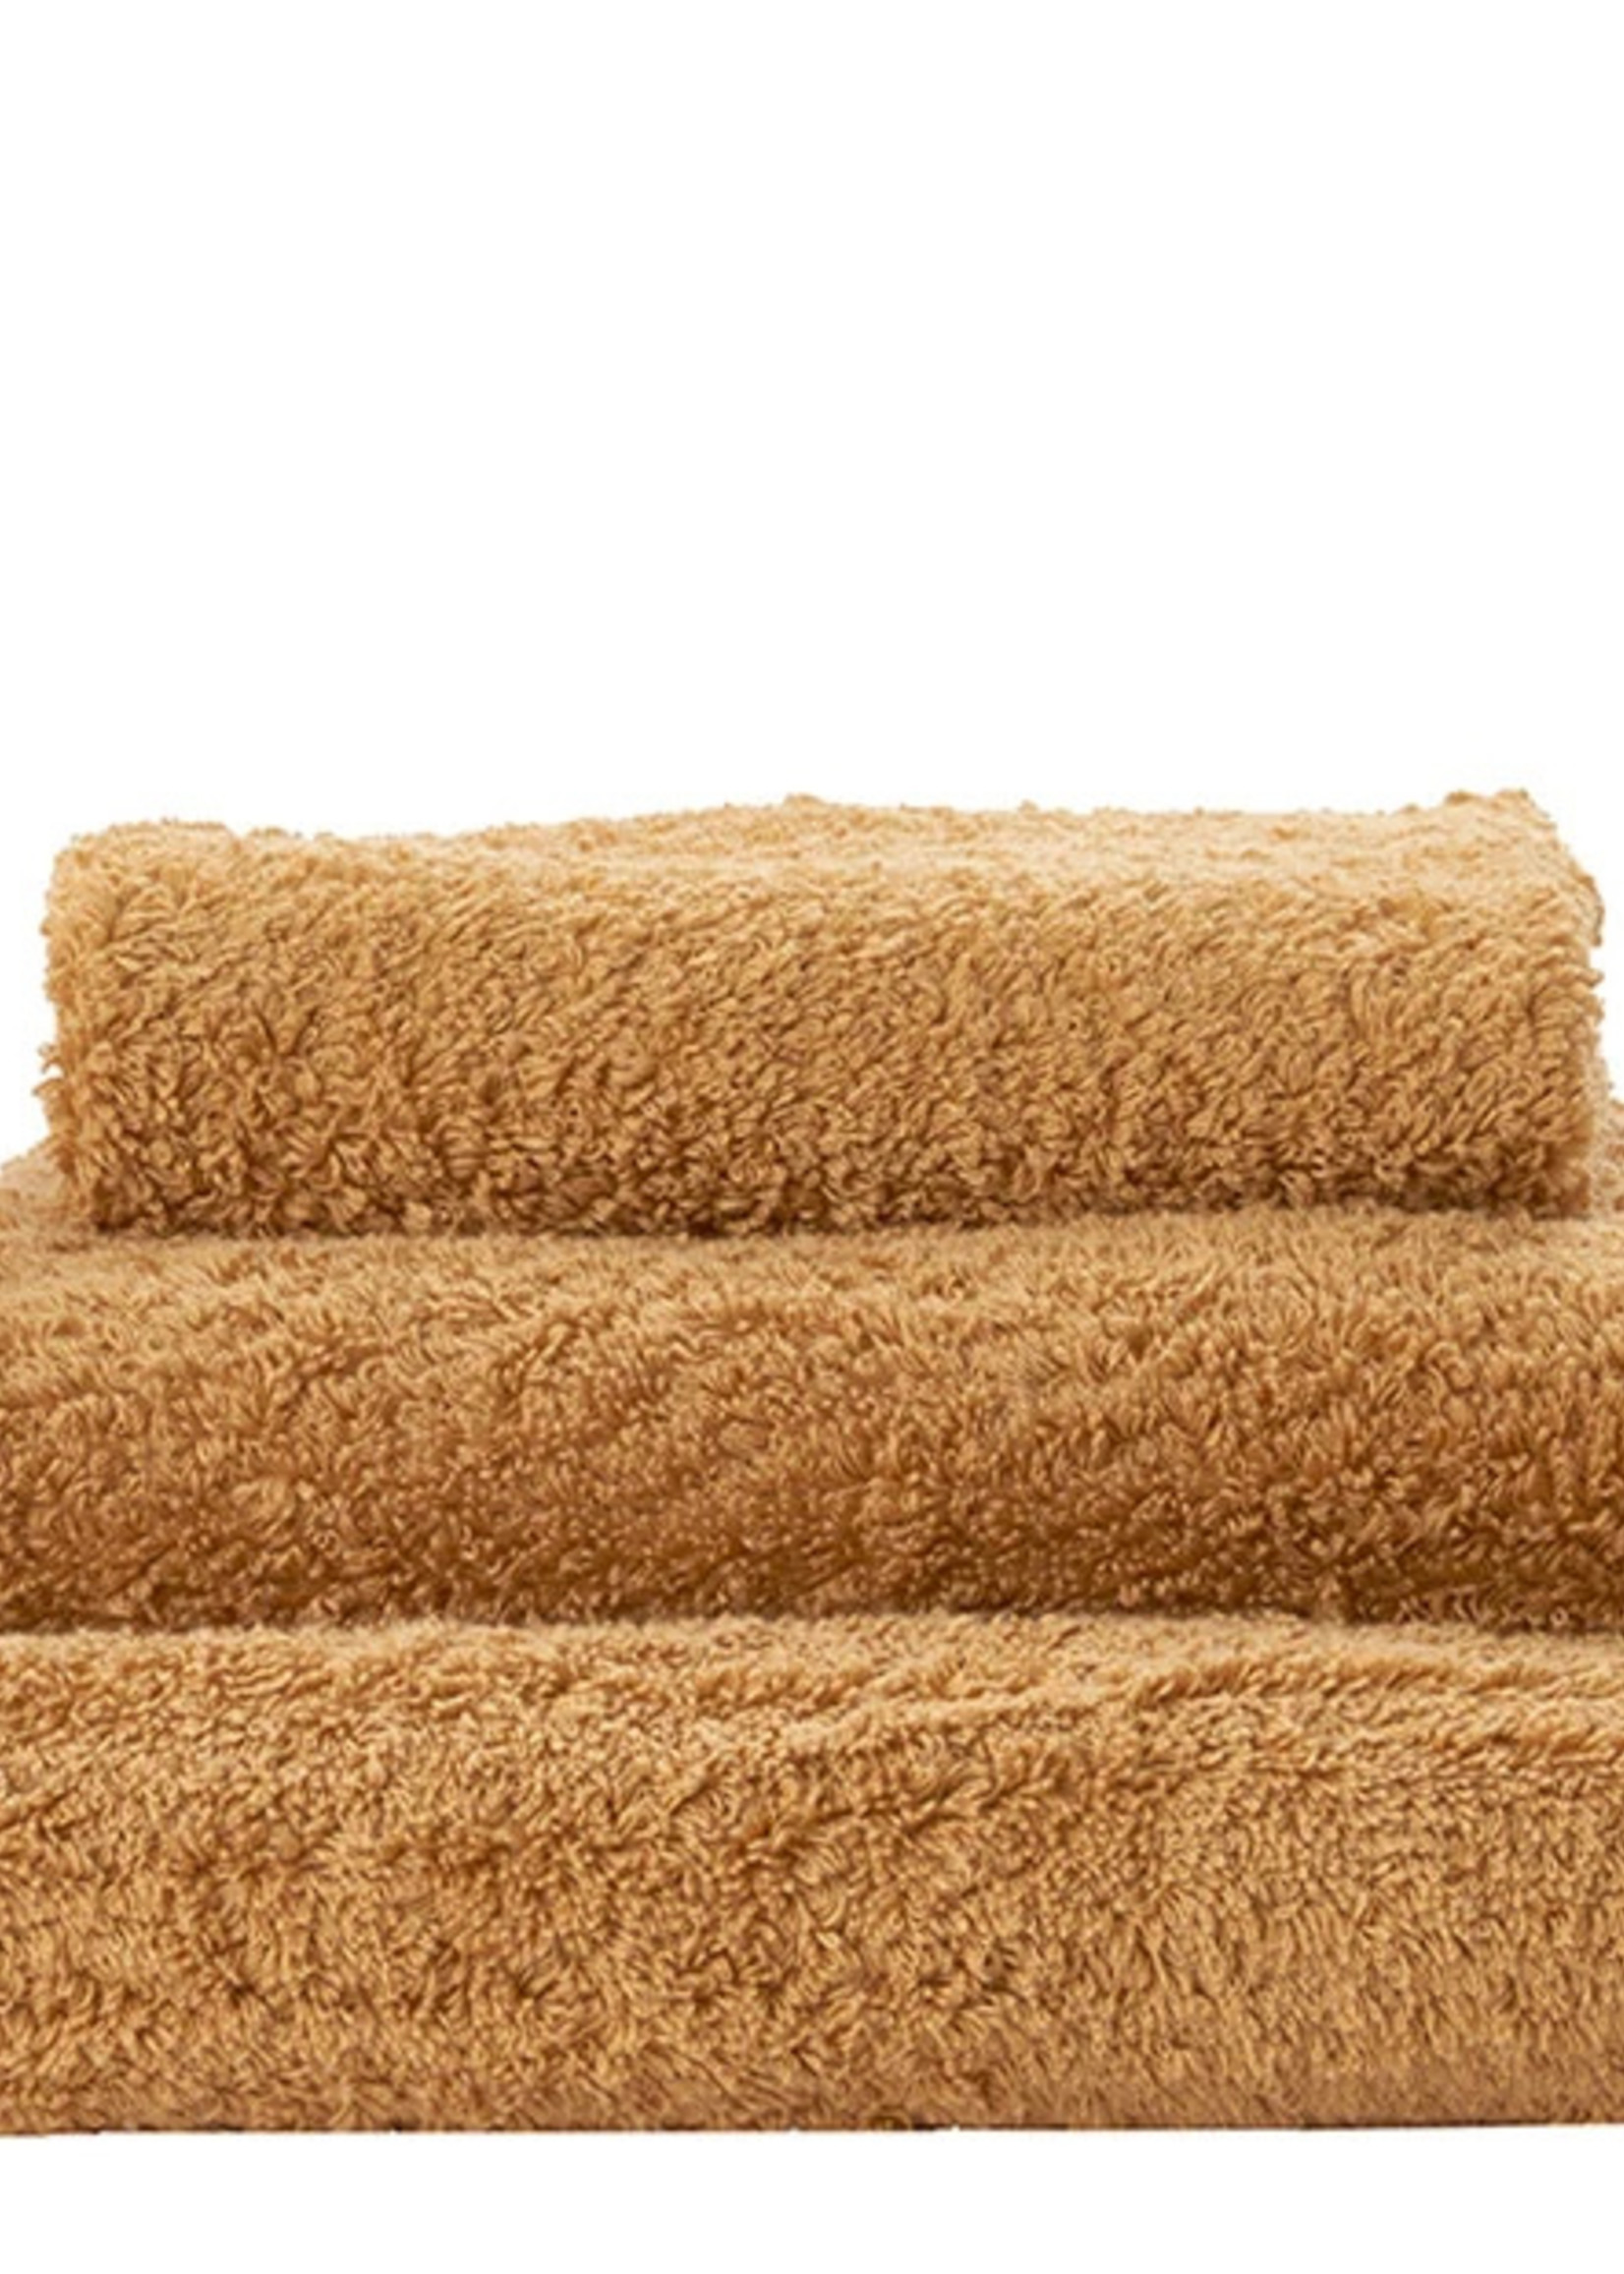 Abyss & Habidecor Super Pile Gold Towels